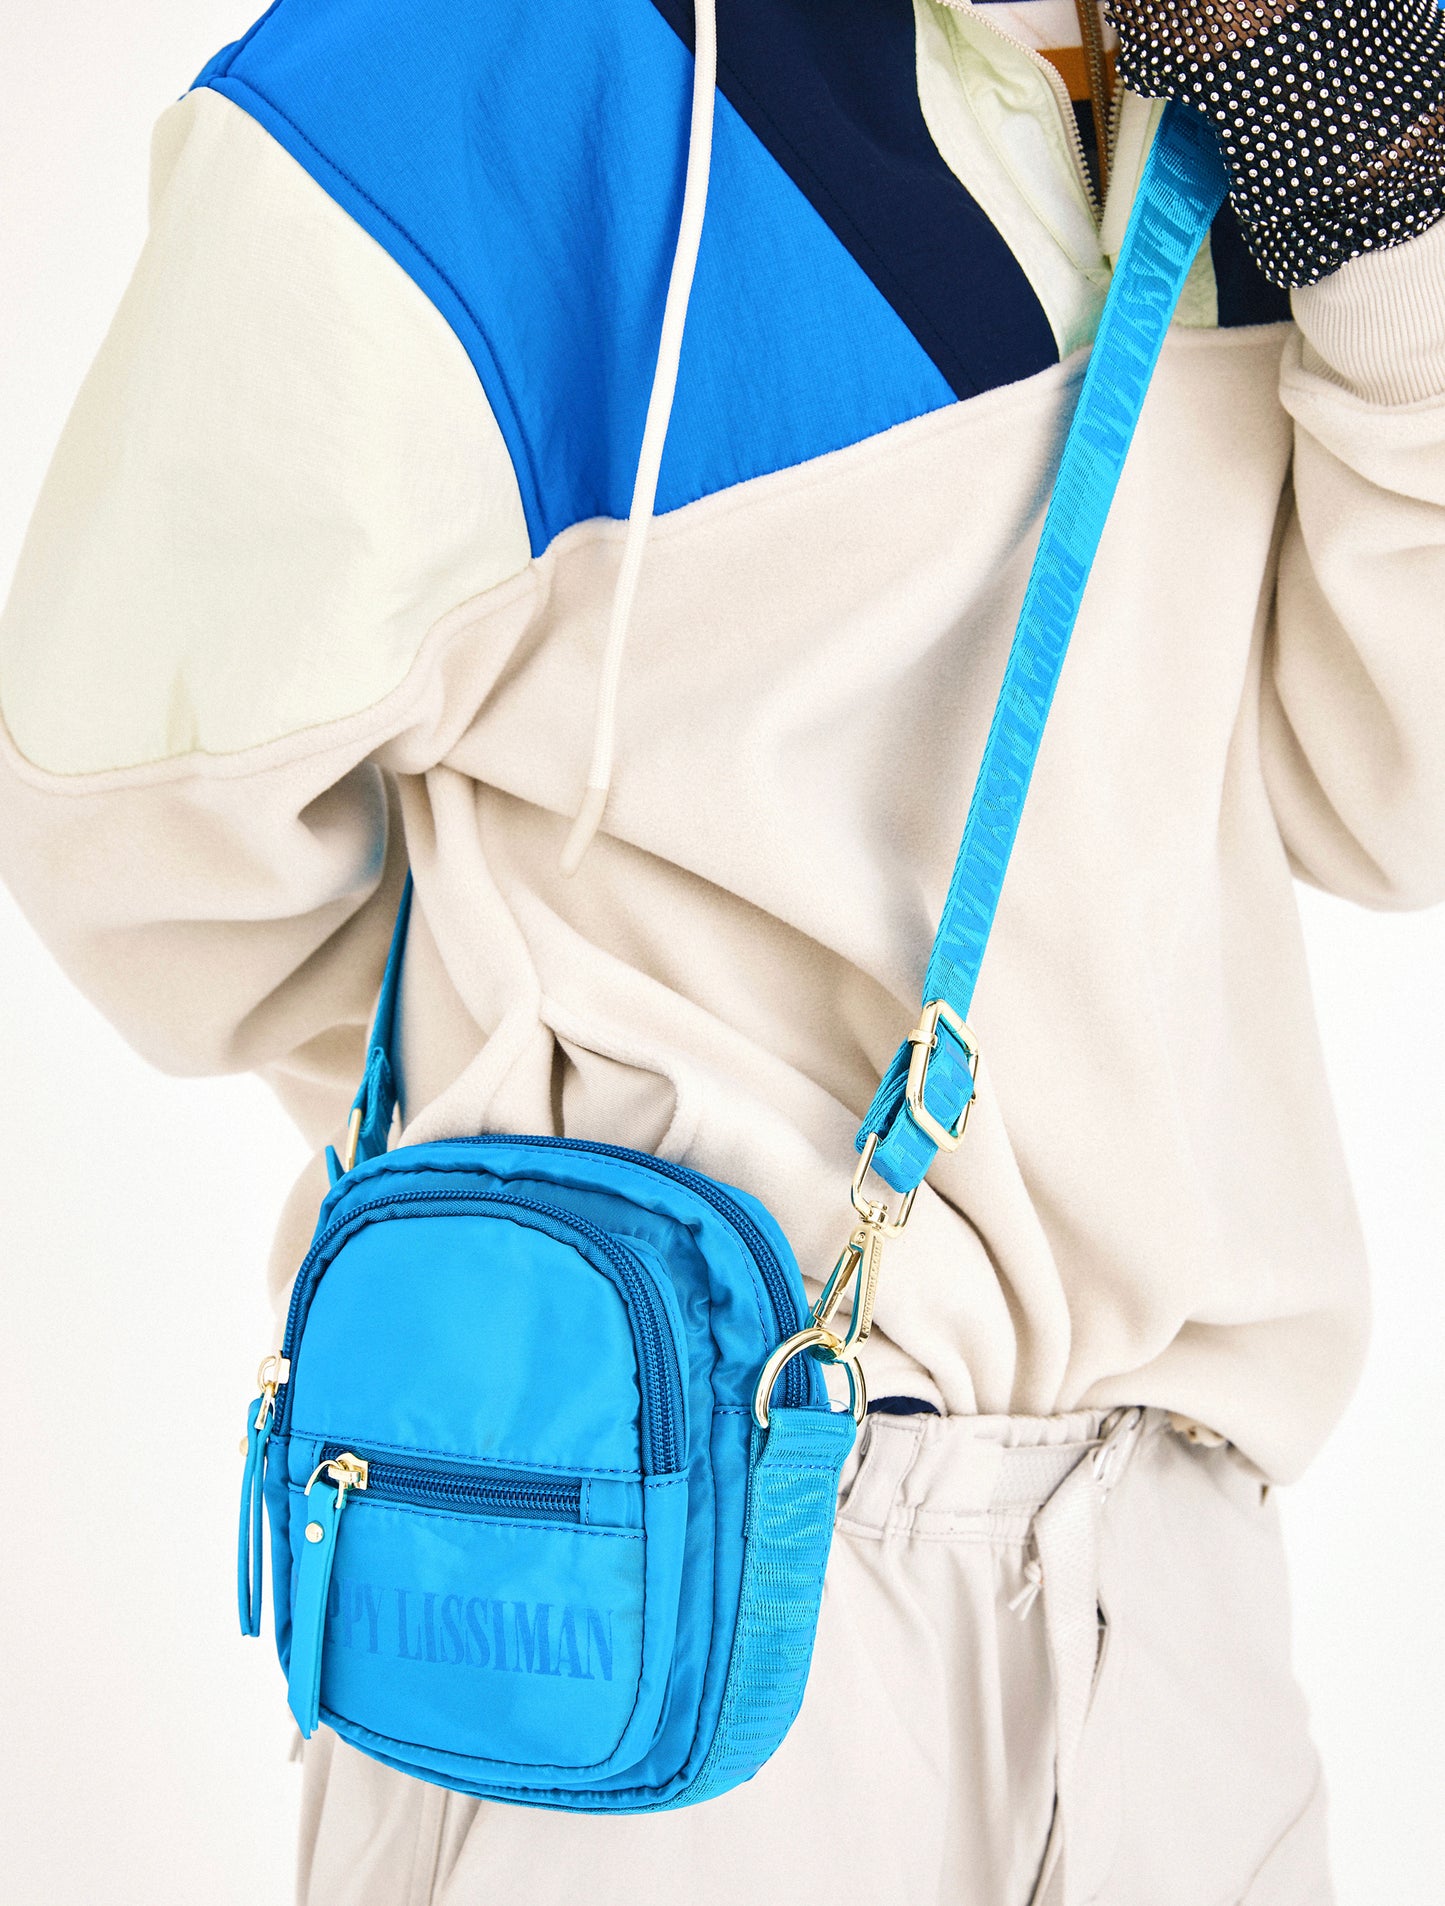 Nifty Camera Bag - Electric Blue – Poppy Lissiman US